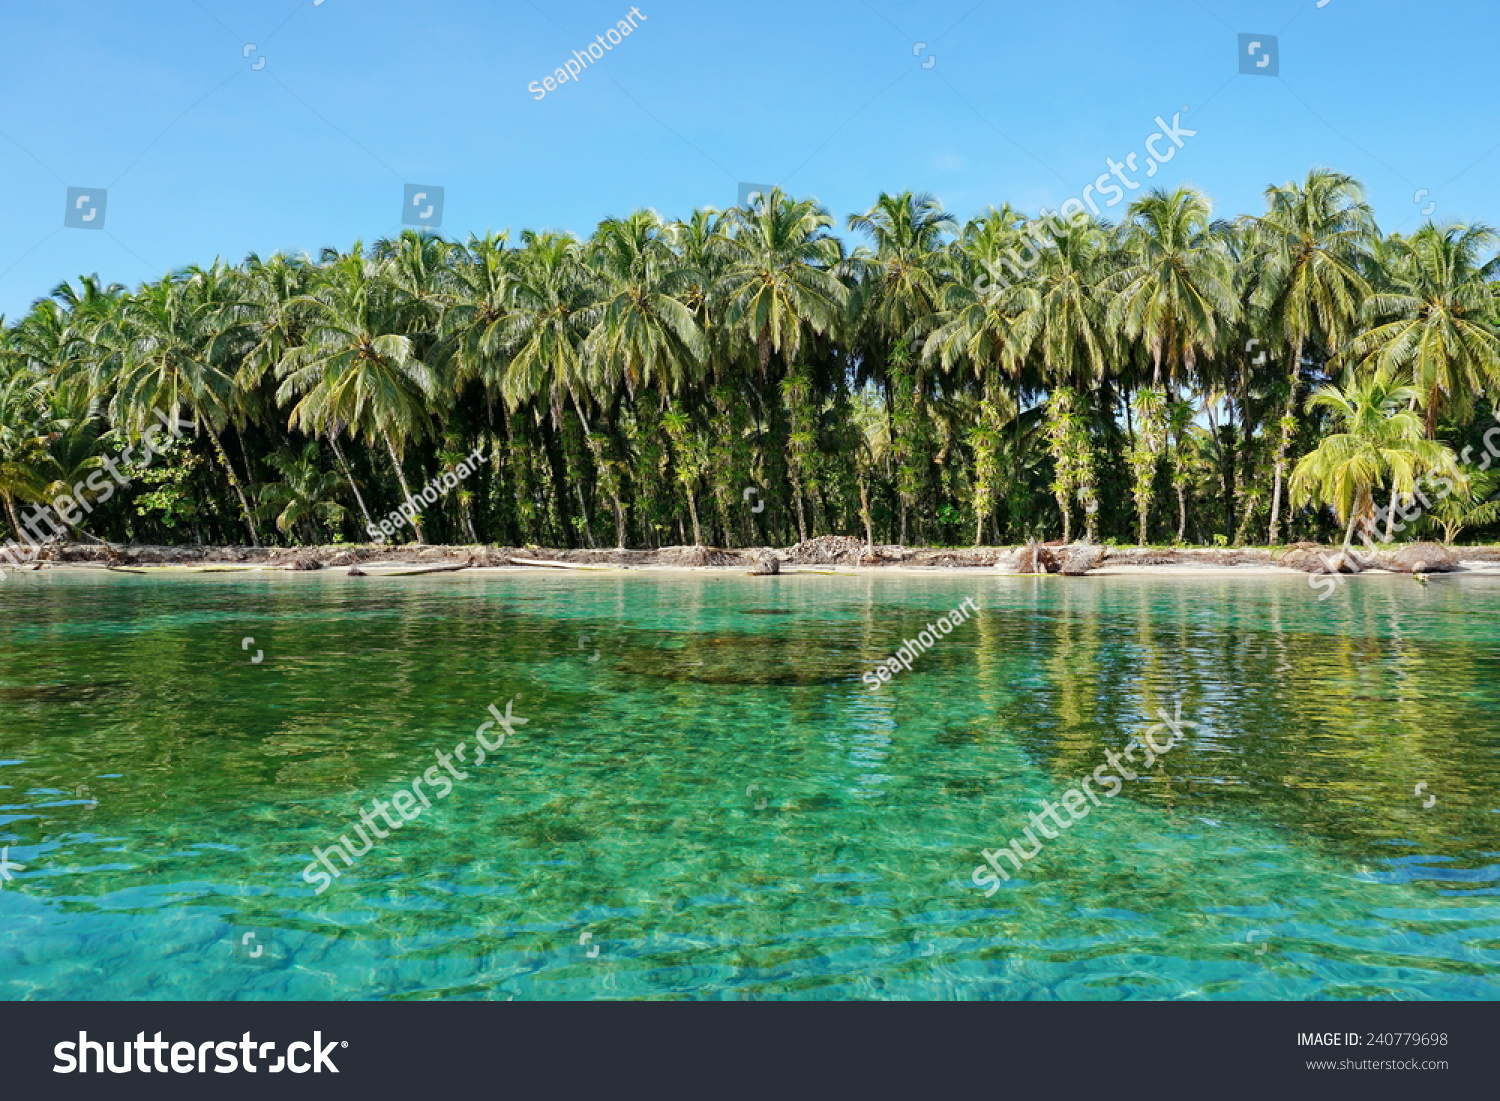 Lush coconut trees with epiphytes on tropical shore with clear water, Caribbean, Zapatillas islands, Bocas del Toro, Panama #240779698